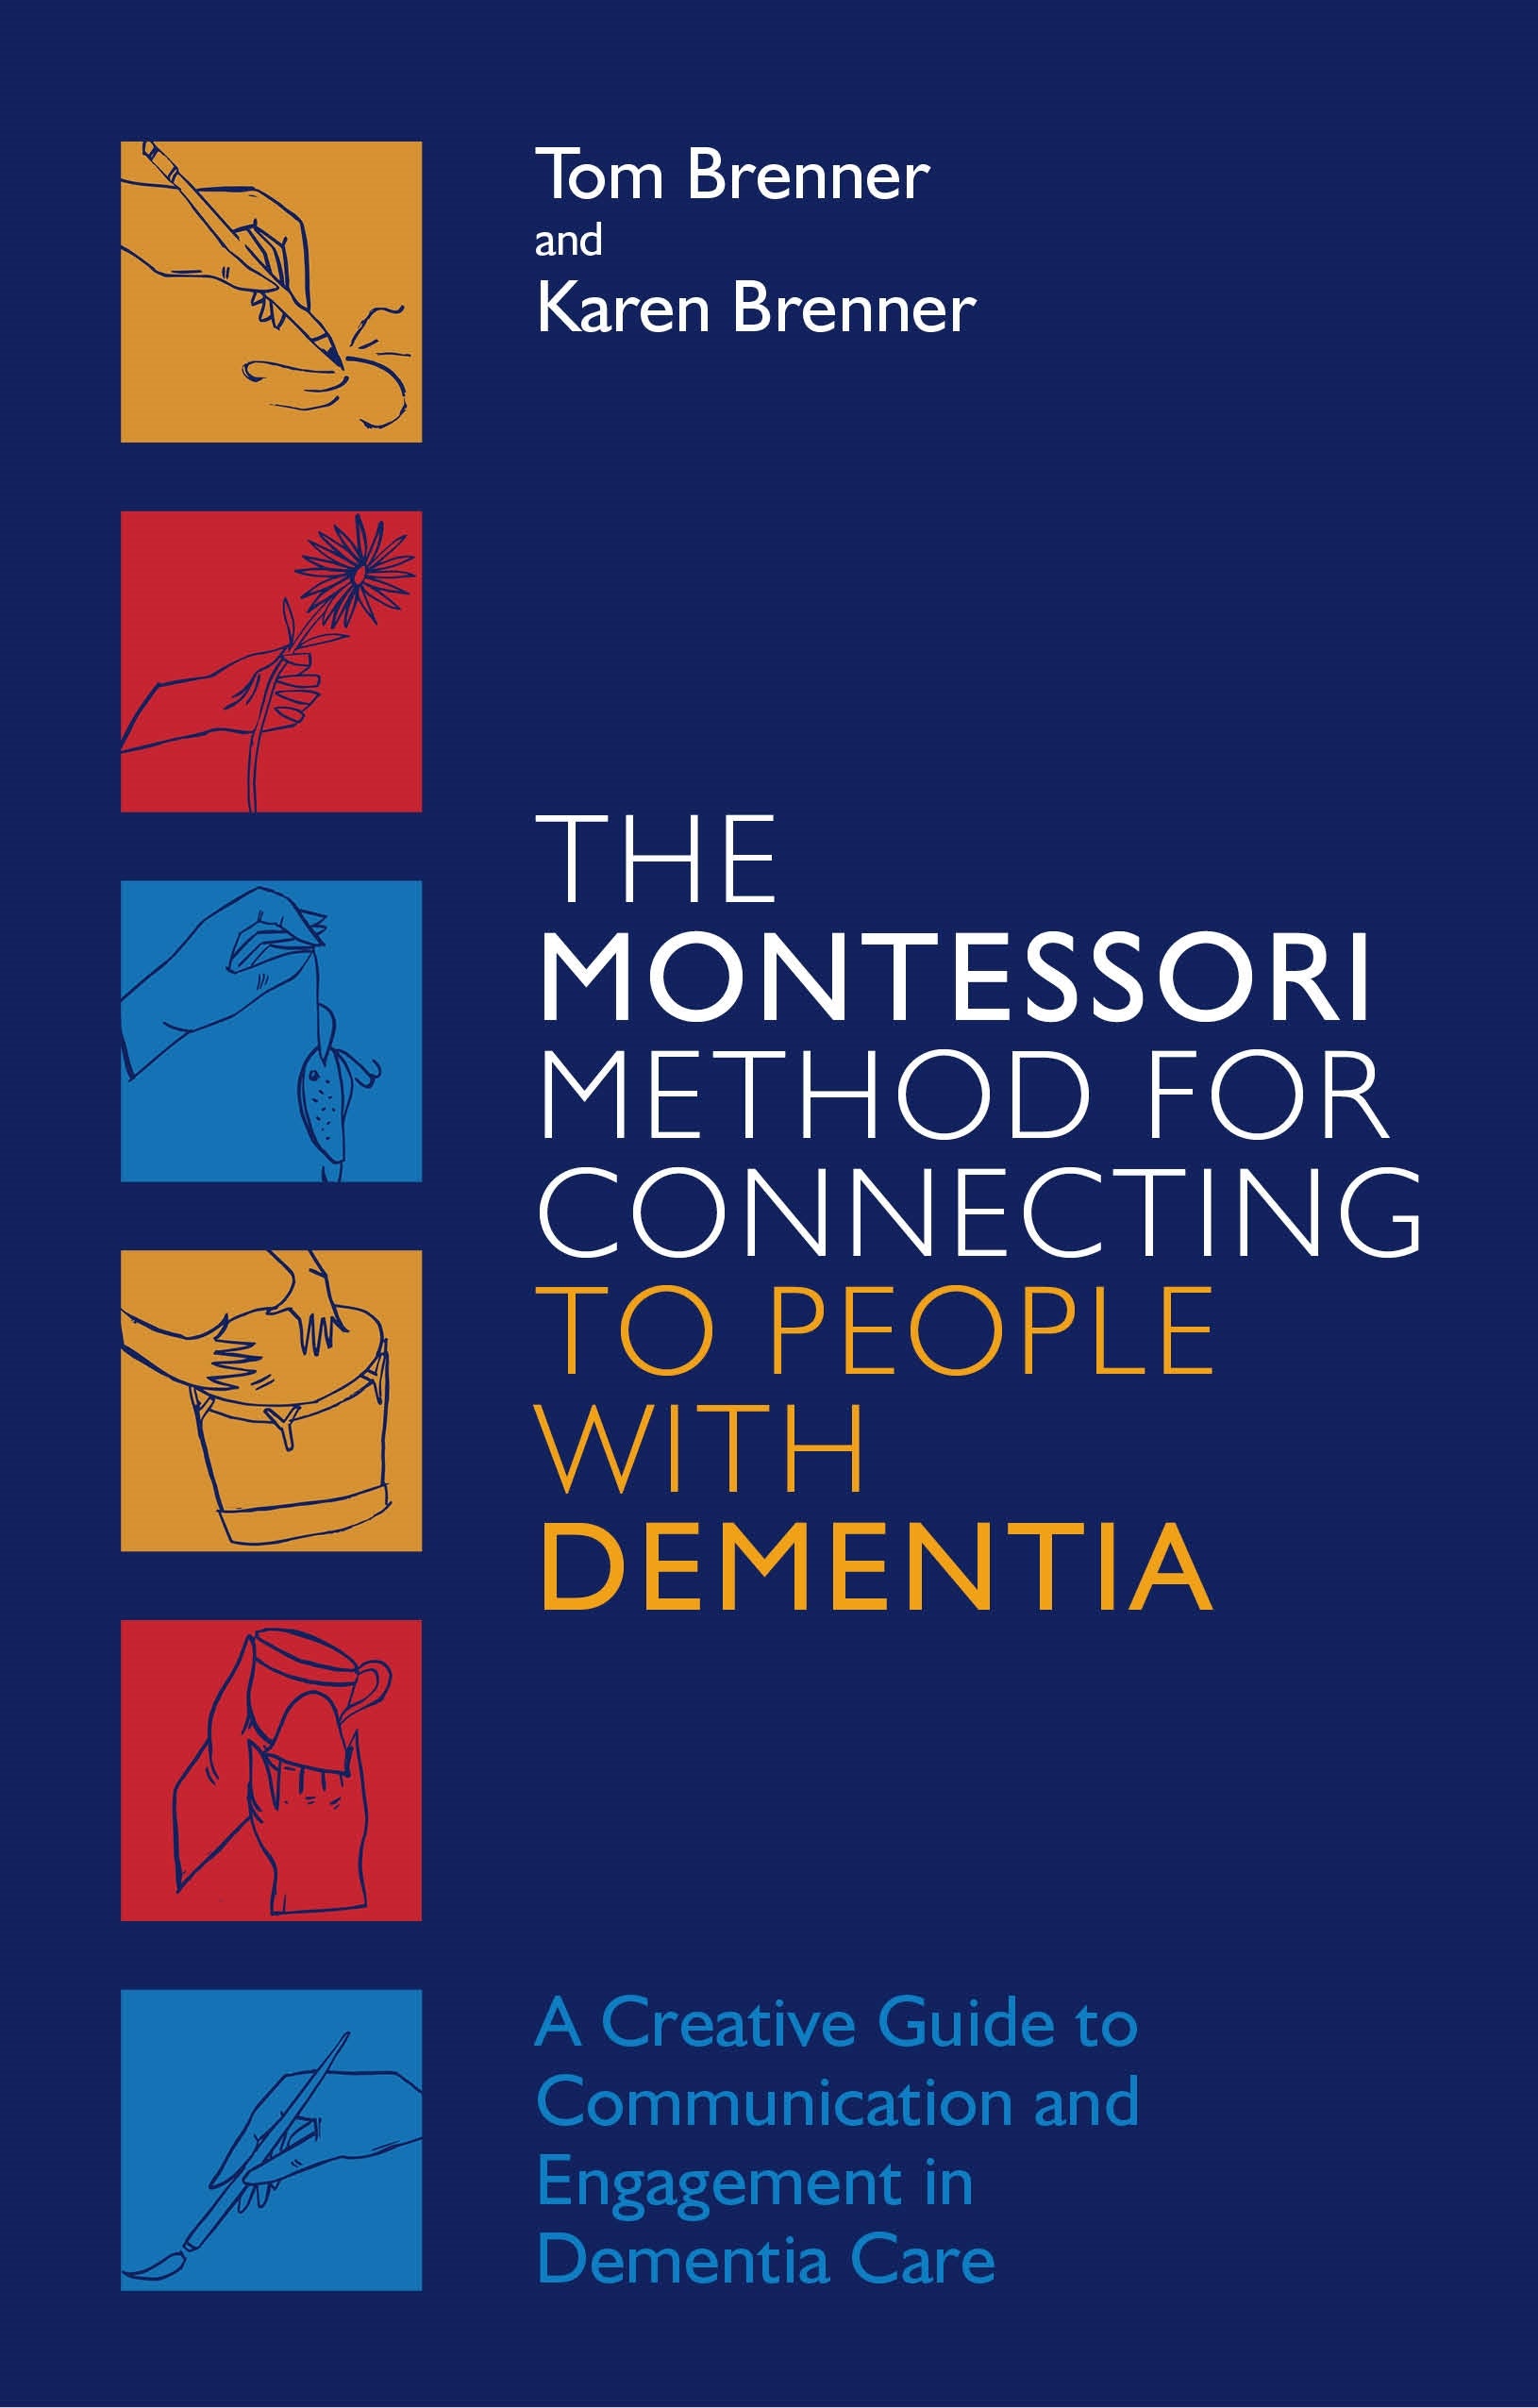 The Montessori Method for Connecting to People with Dementia by Karen Brenner, Tom Brenner